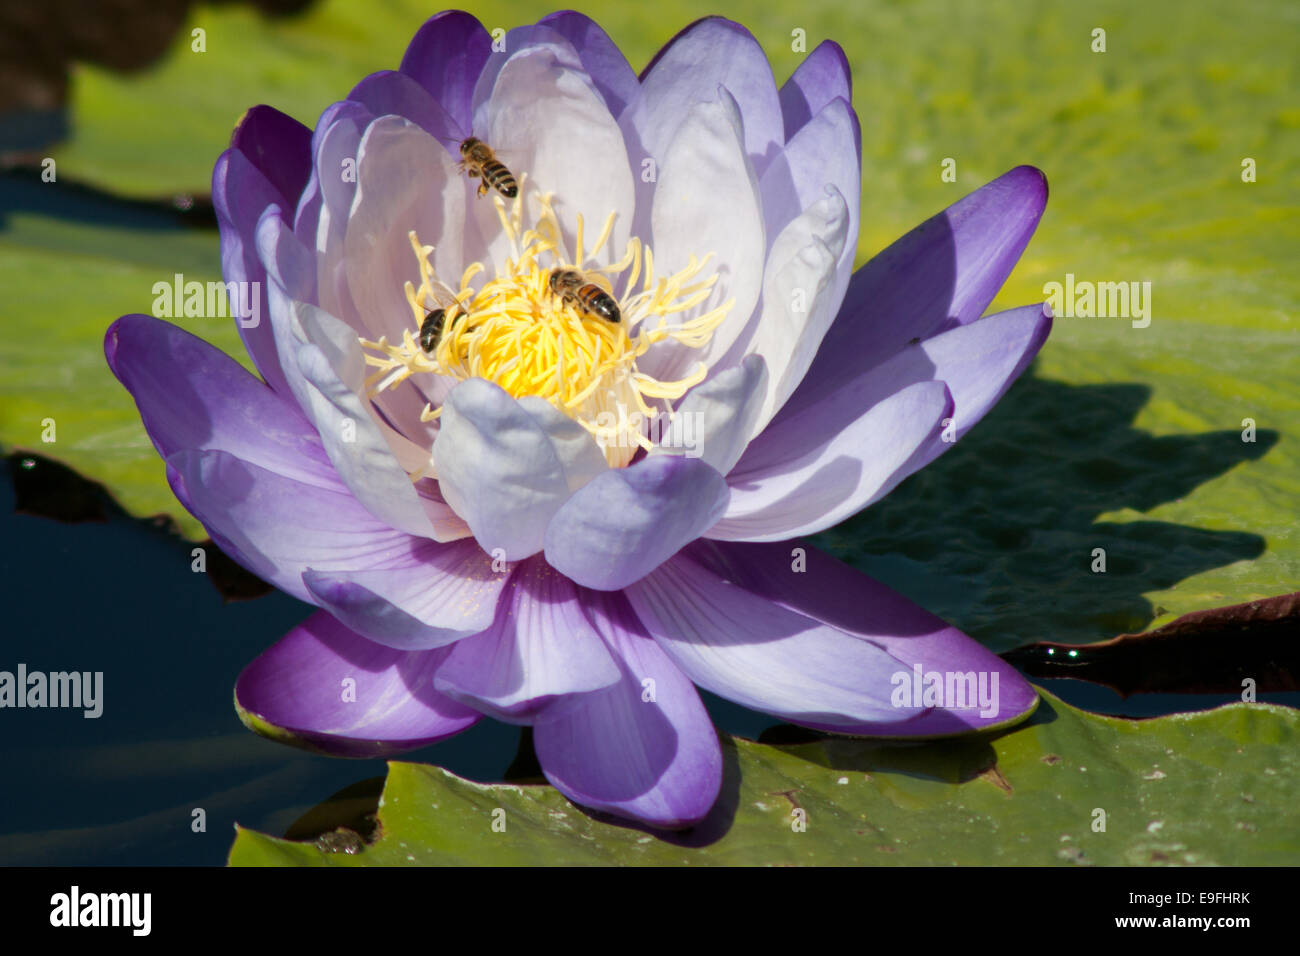 Water lily (Nymphaea) Stock Photo